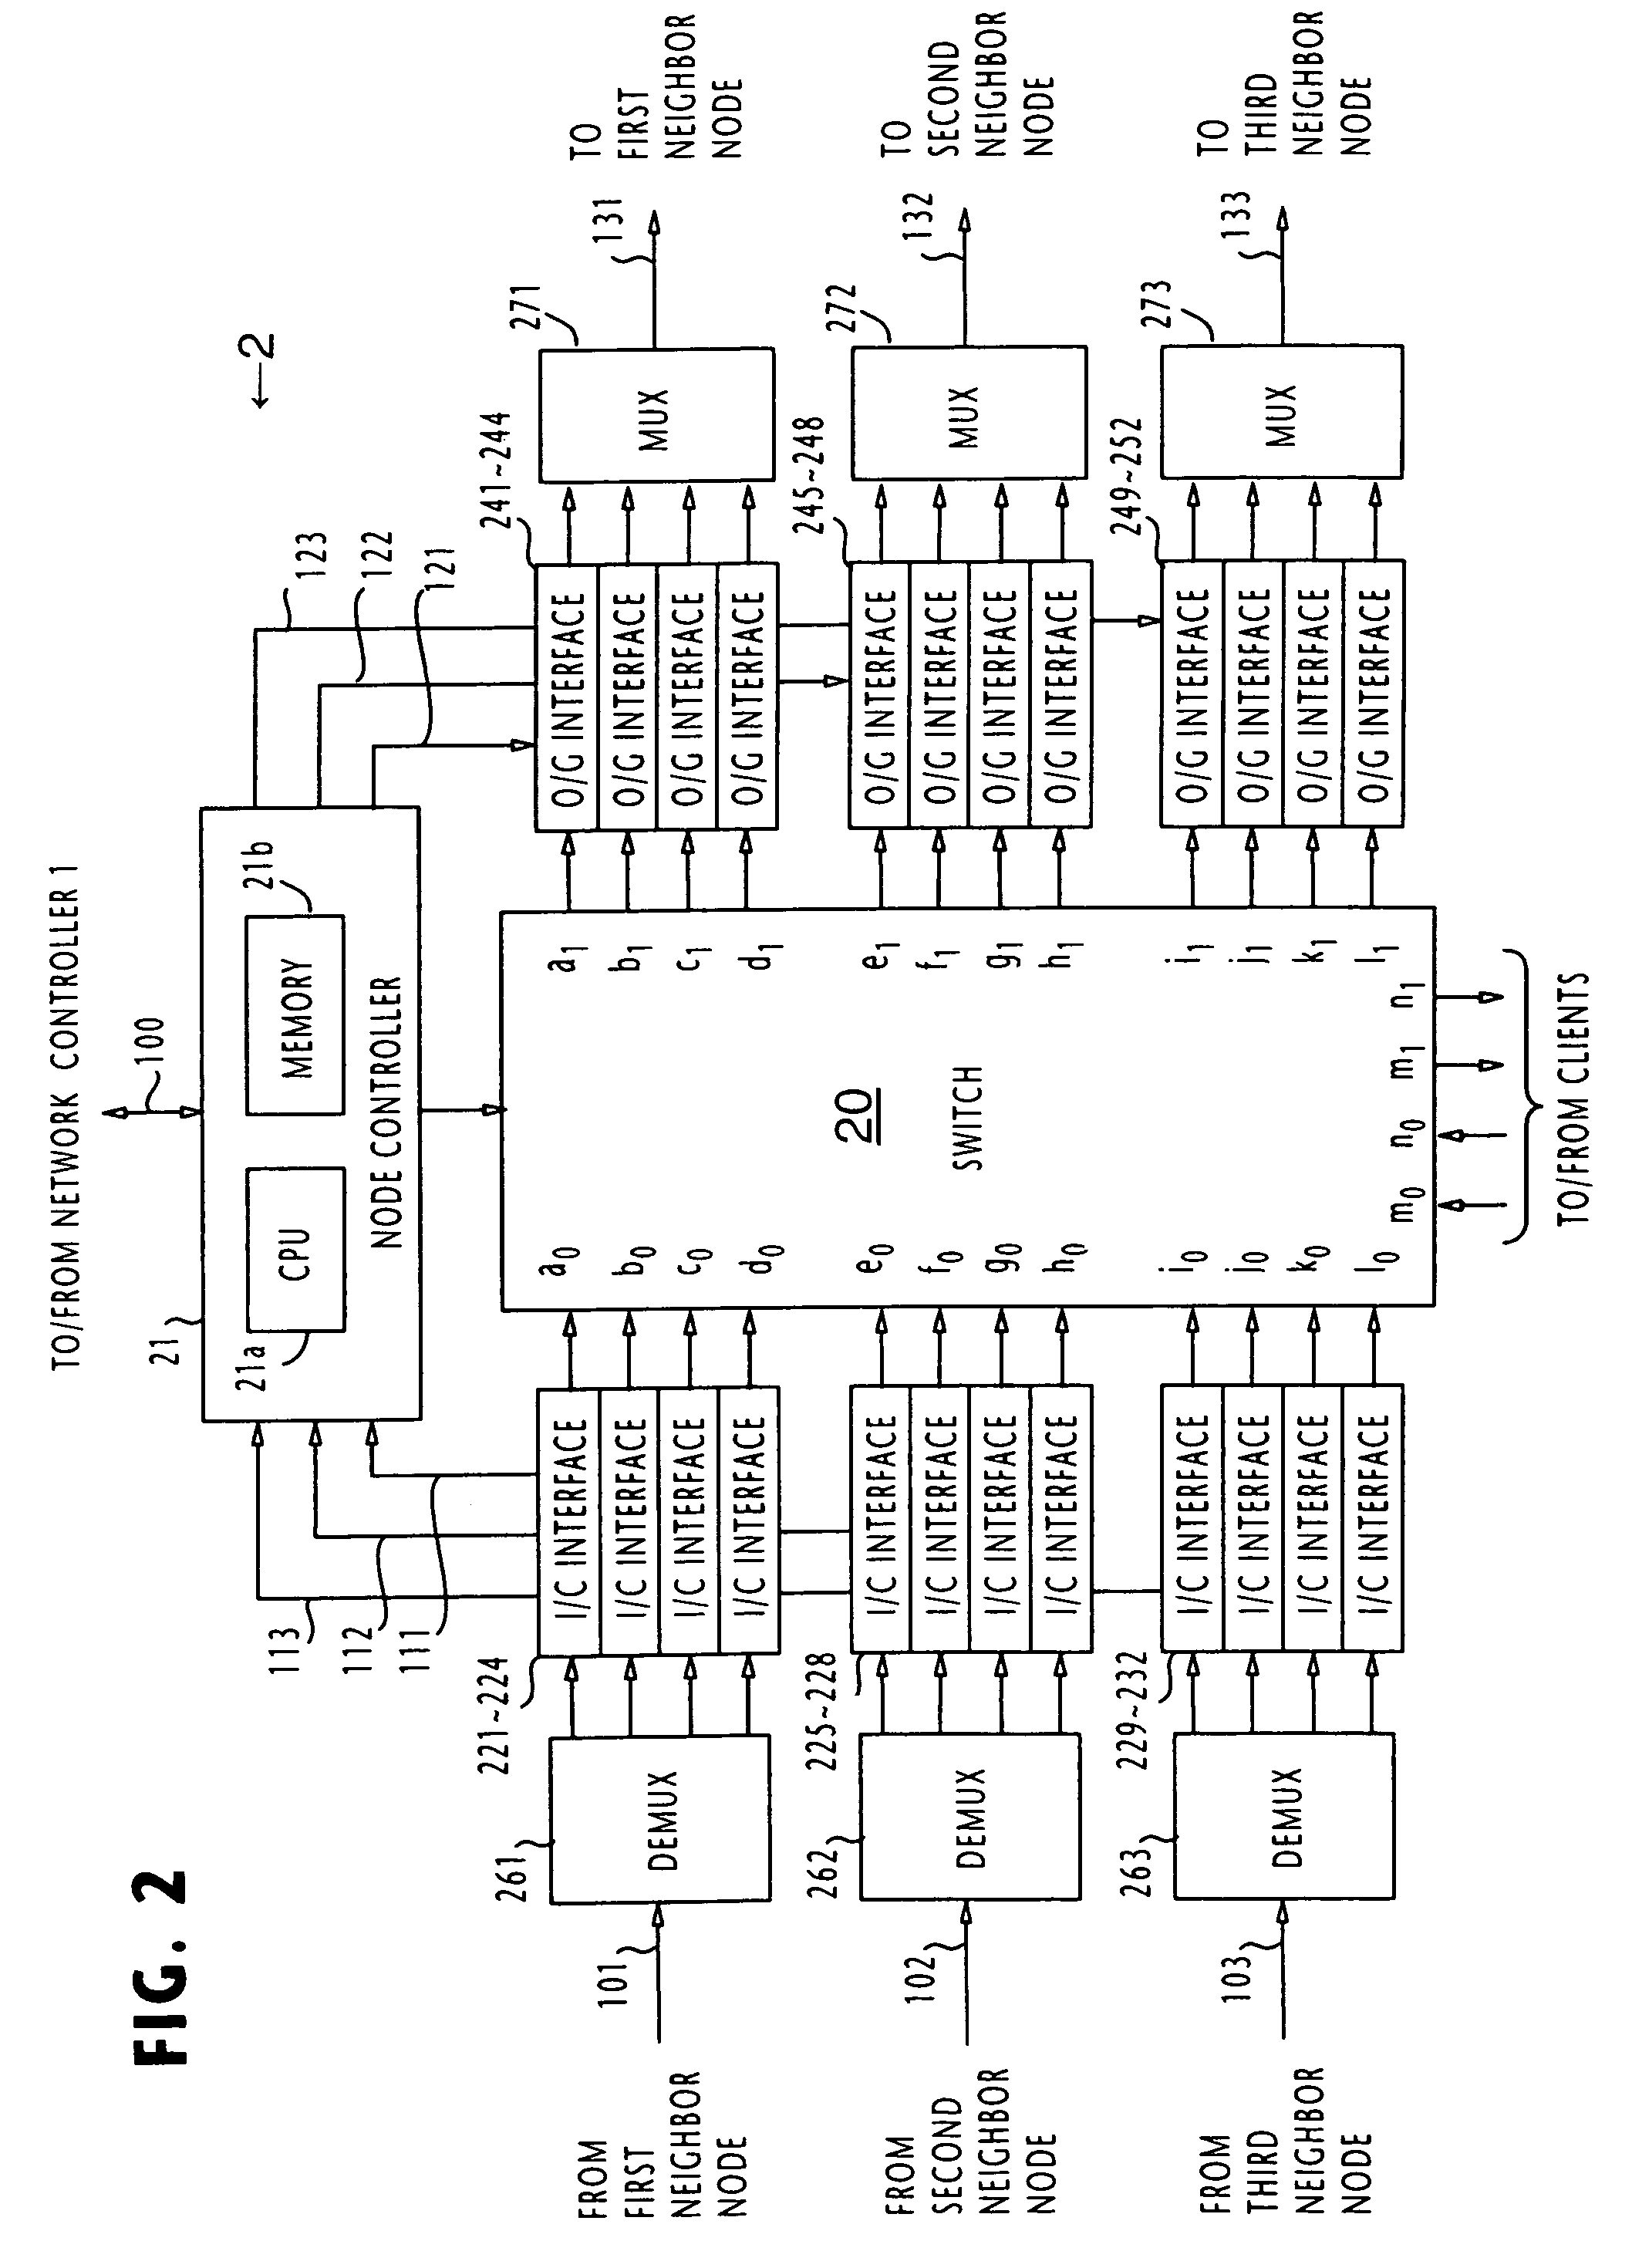 Path establishment method for establishing paths of different fault recovery types in a communications network